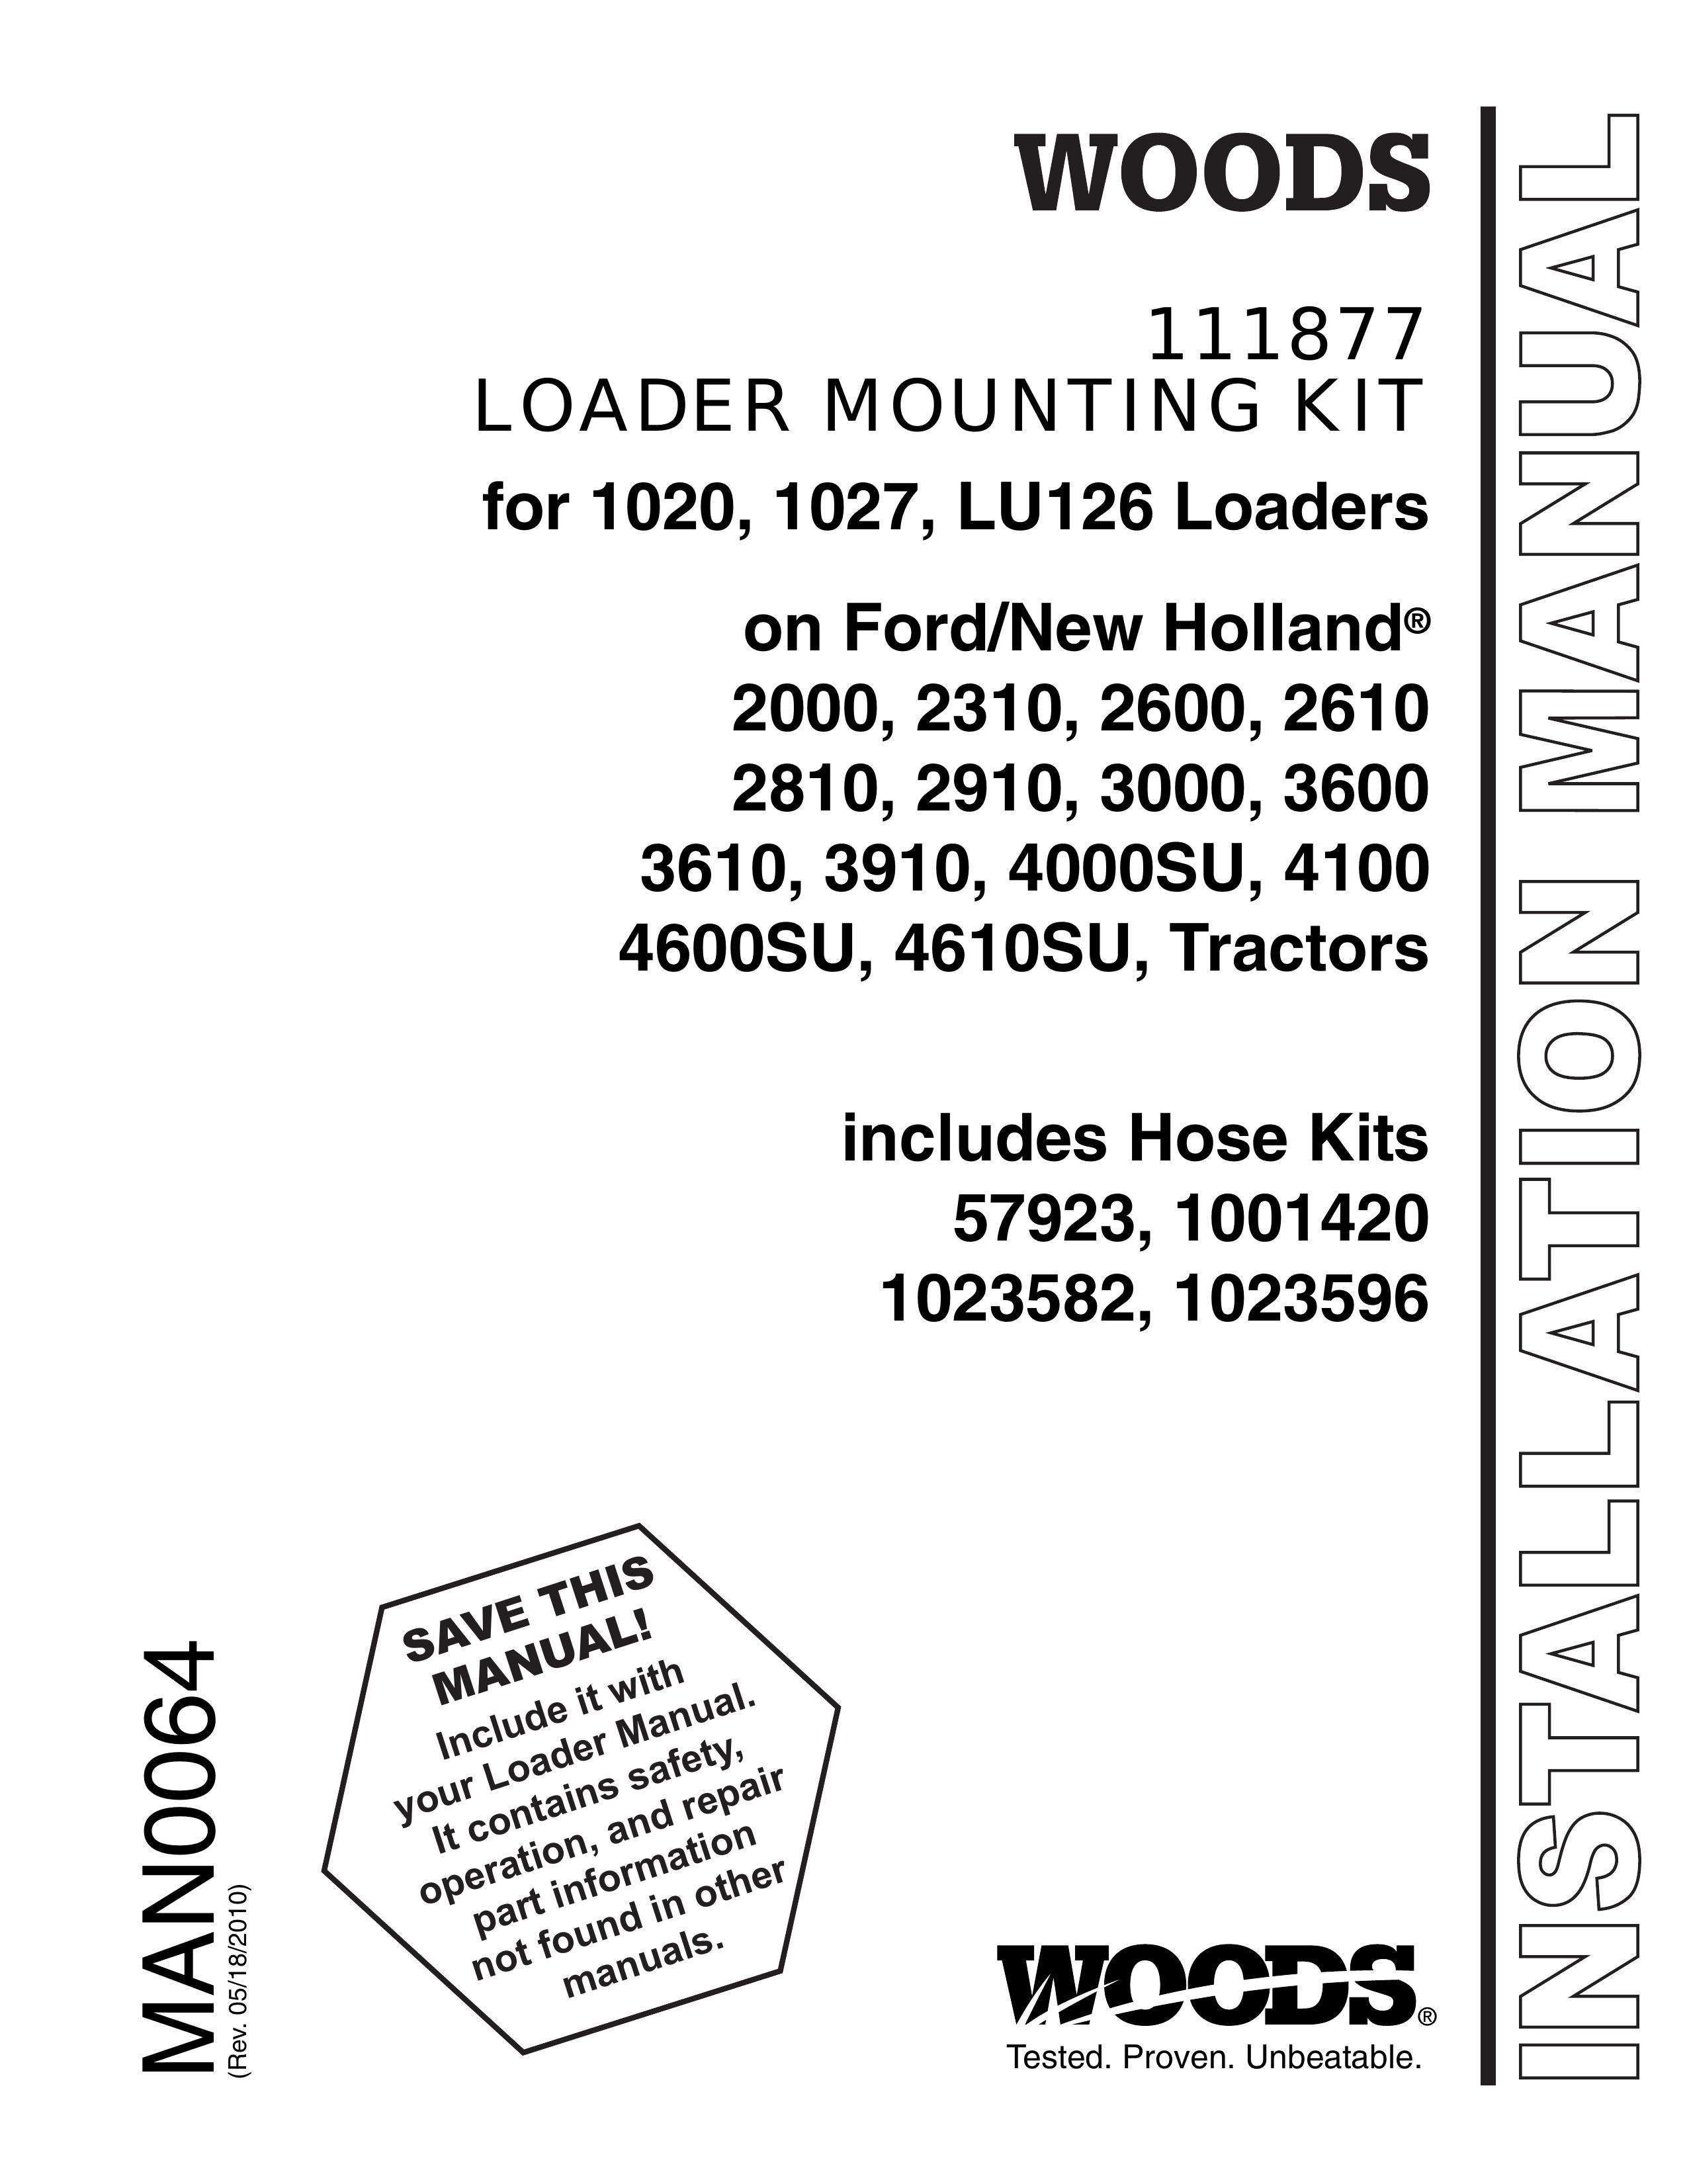 Woods Equipment 111877 Compact Loader User Manual